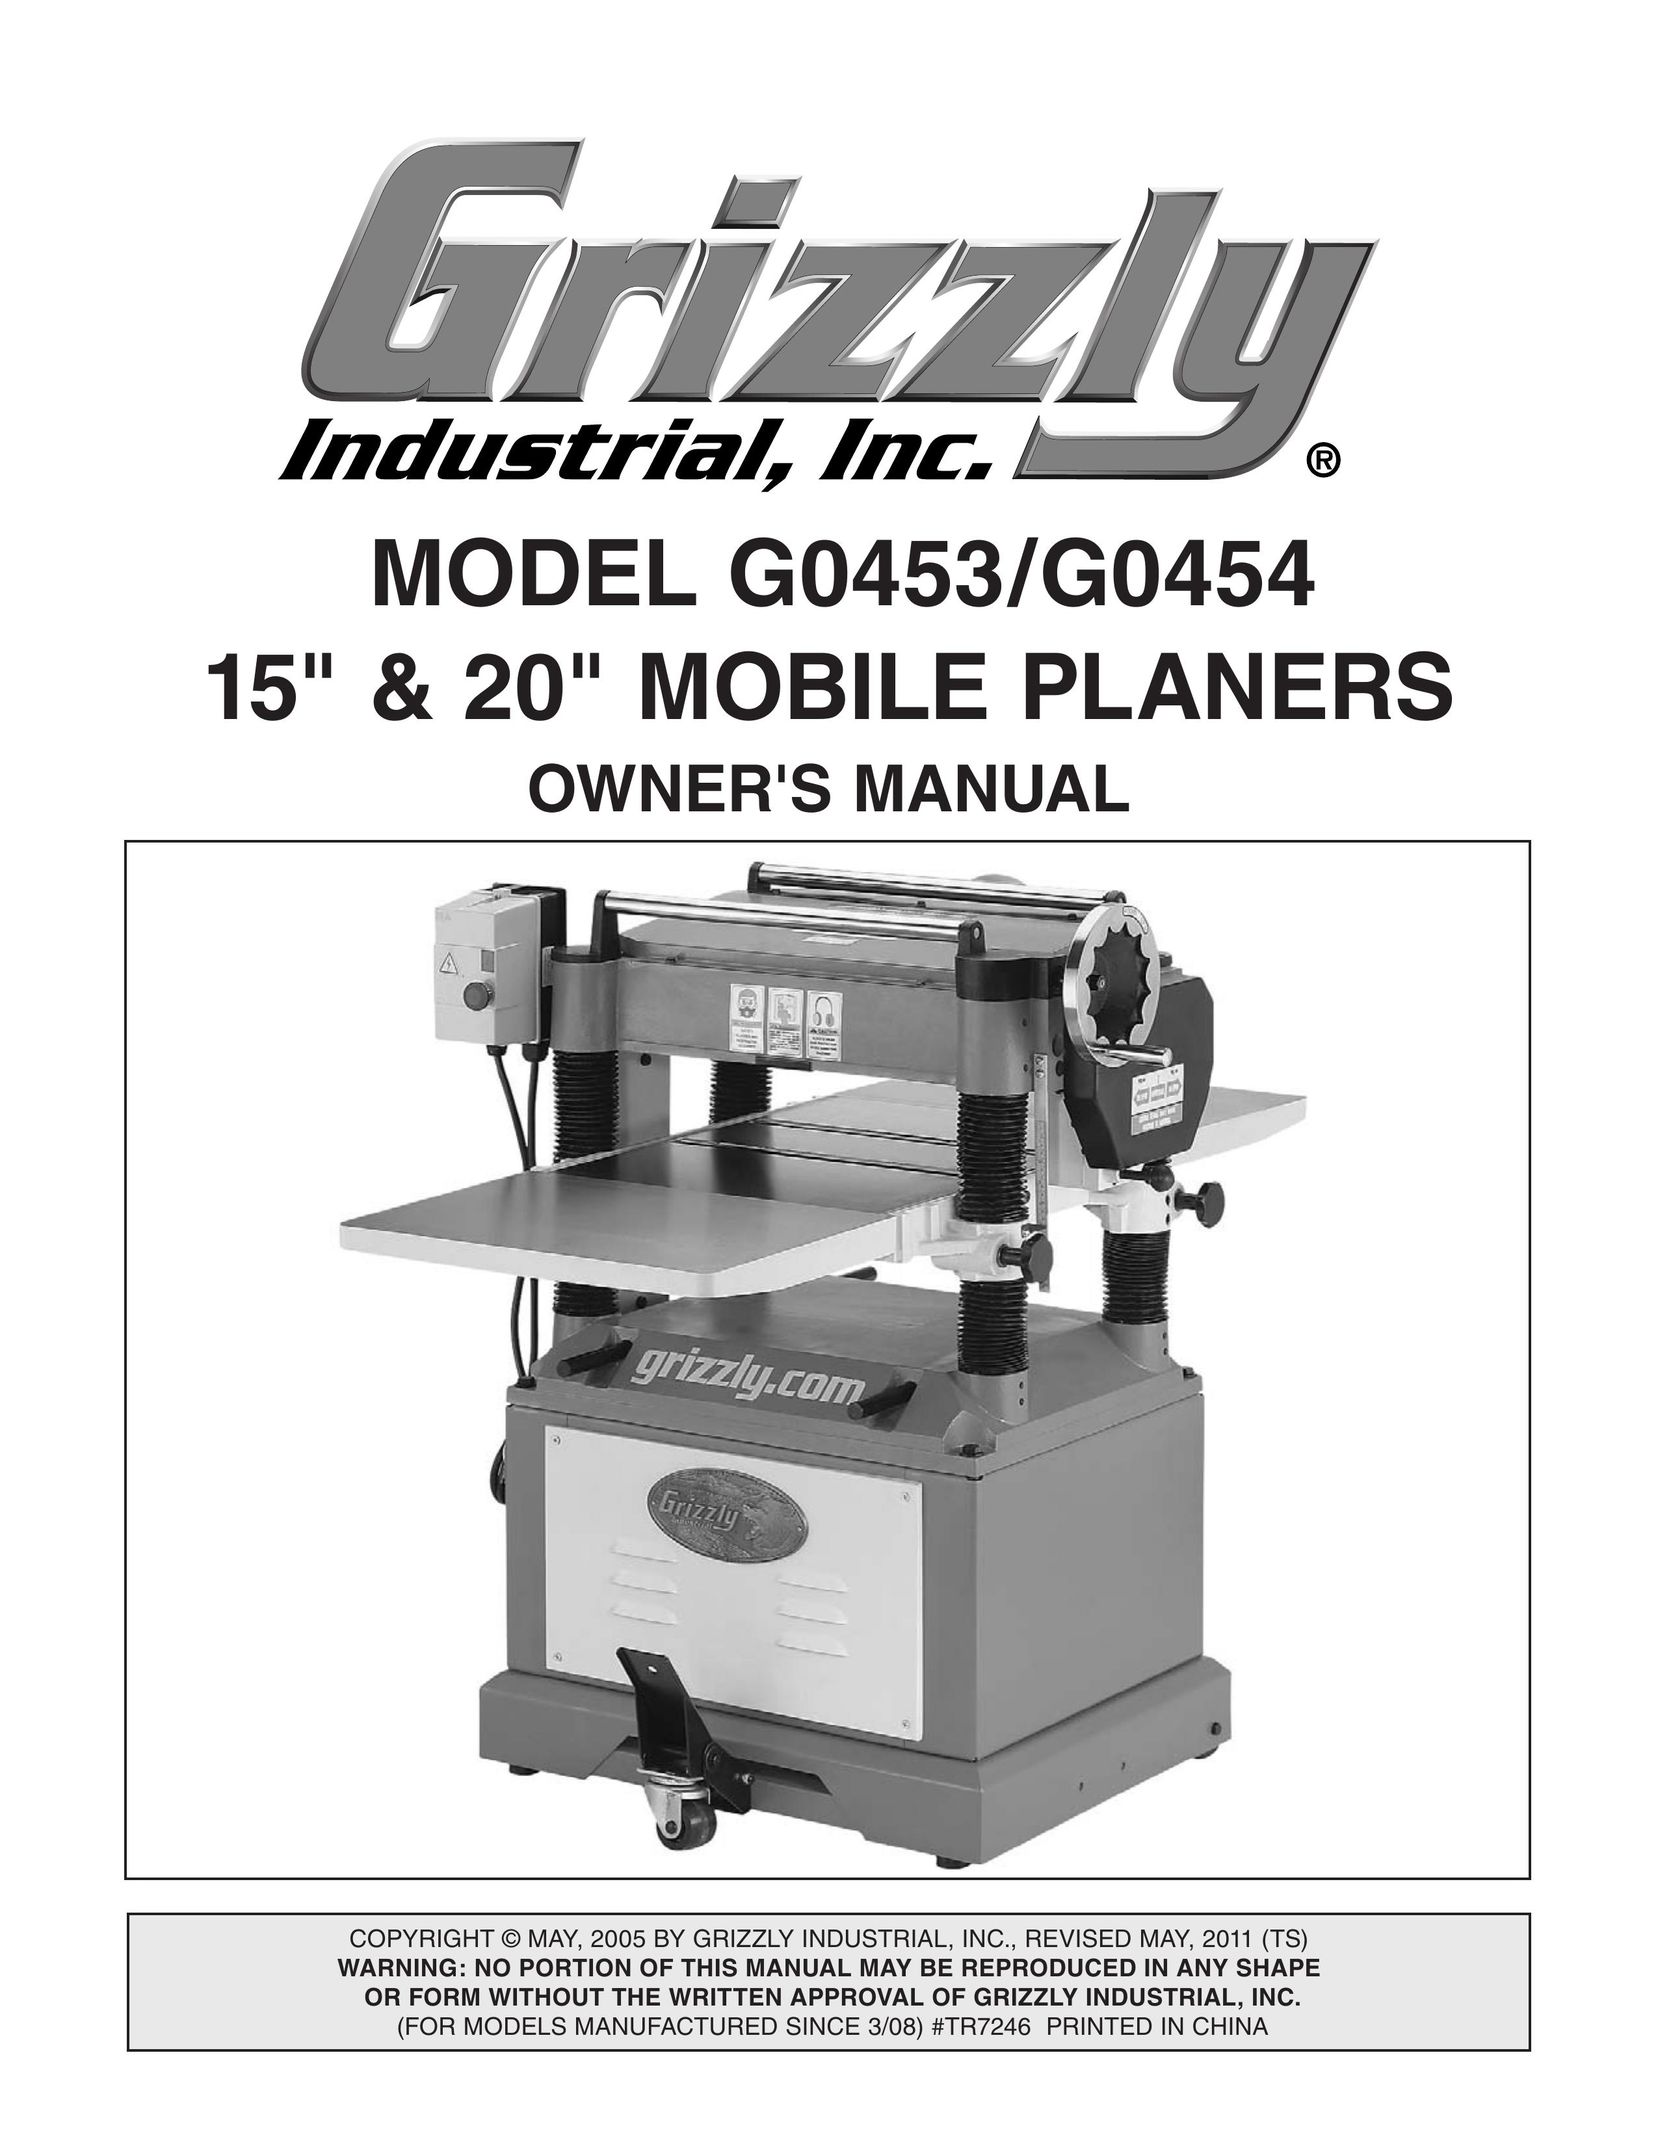 Grizzly G0454 Planer User Manual